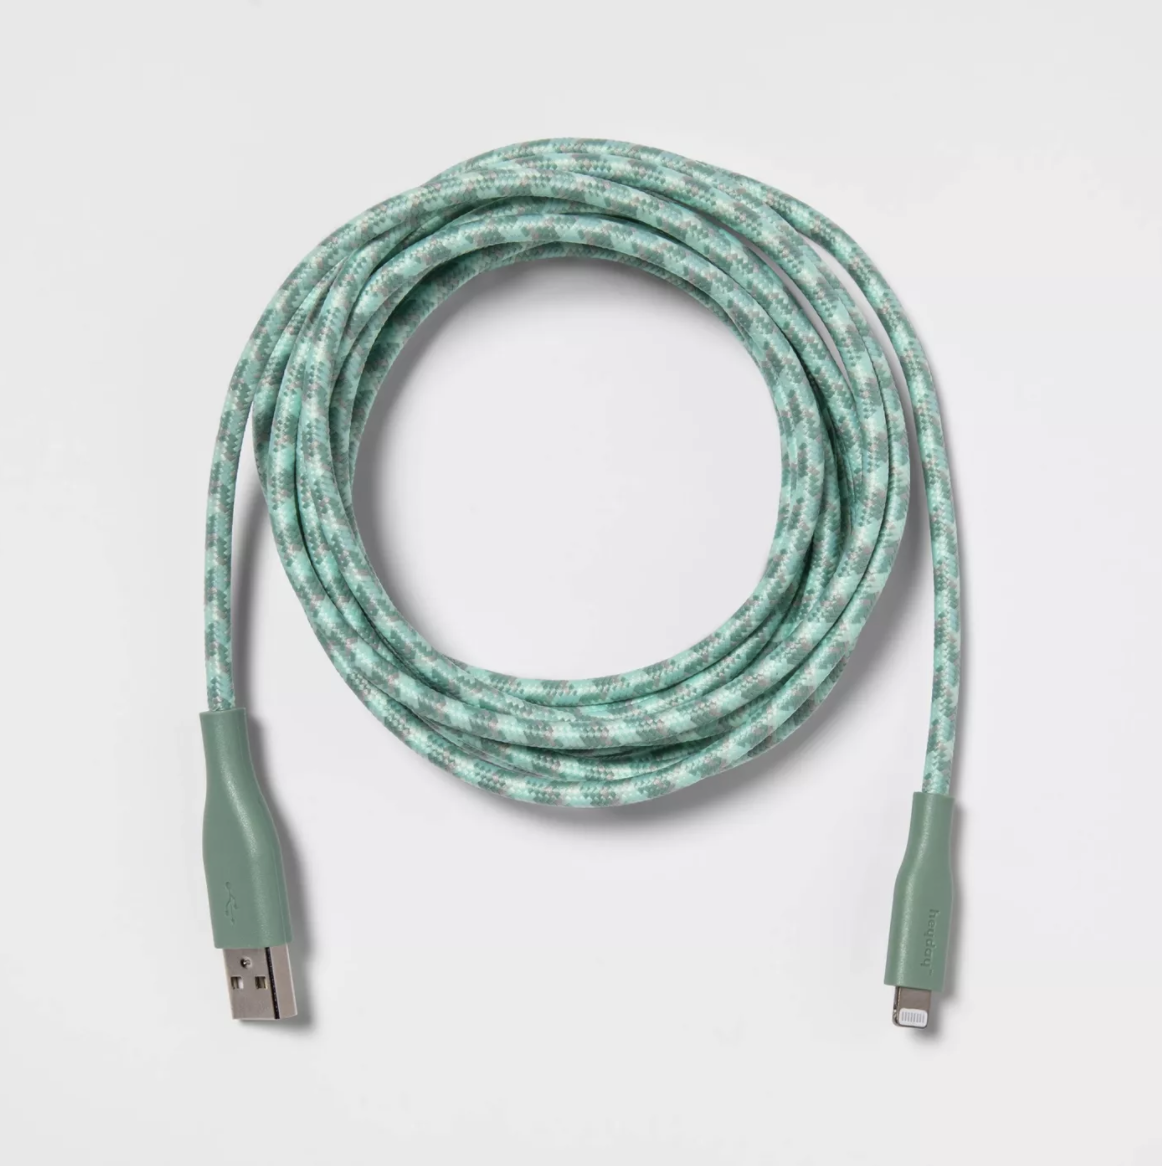 The teal braided charging cord